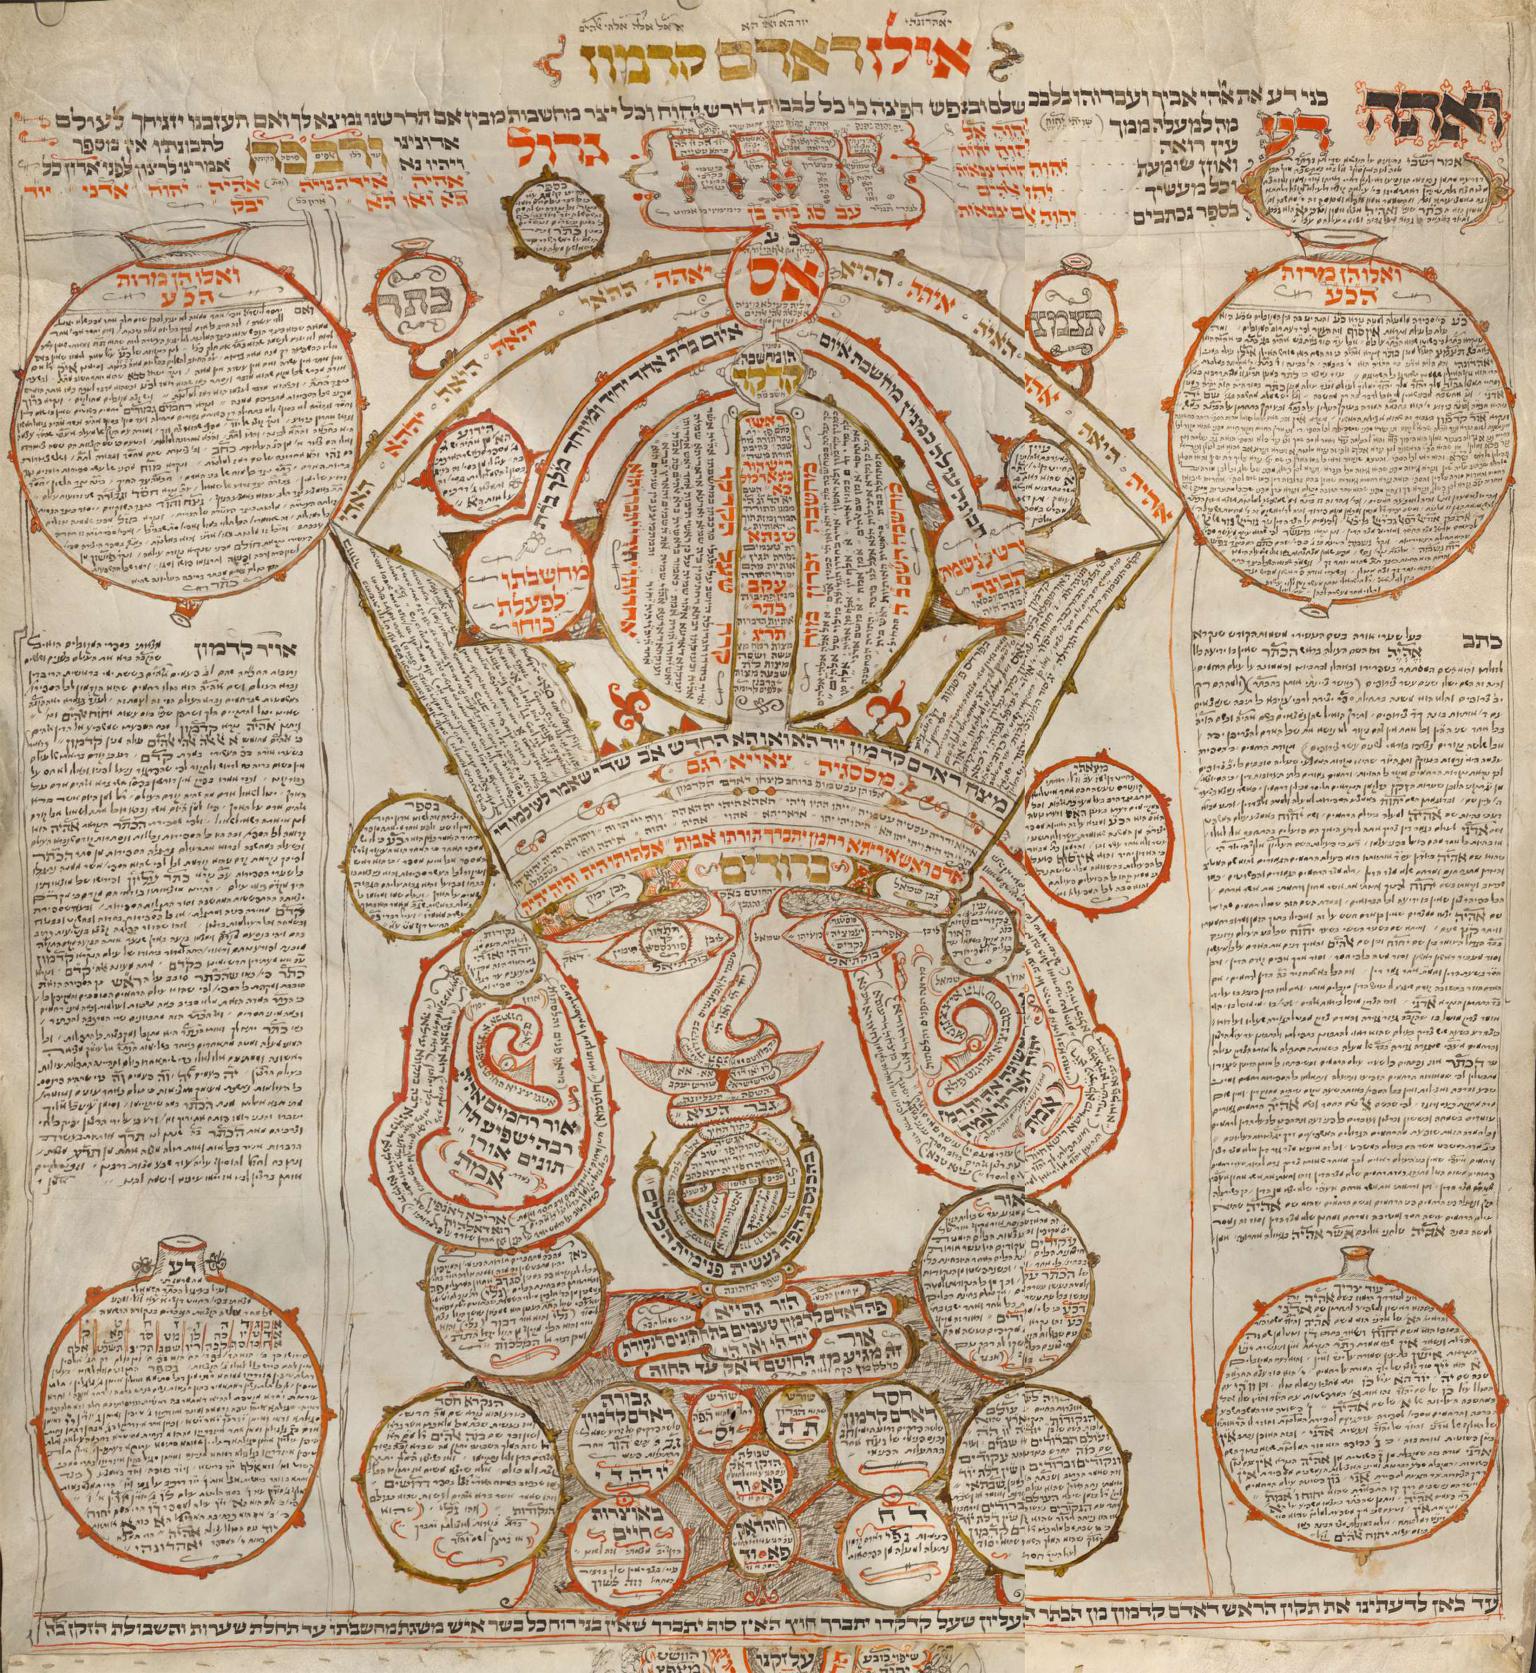 Manuscript page with Hebrew text in circular frames arranged as a diagram in the shape of a human head with crown.